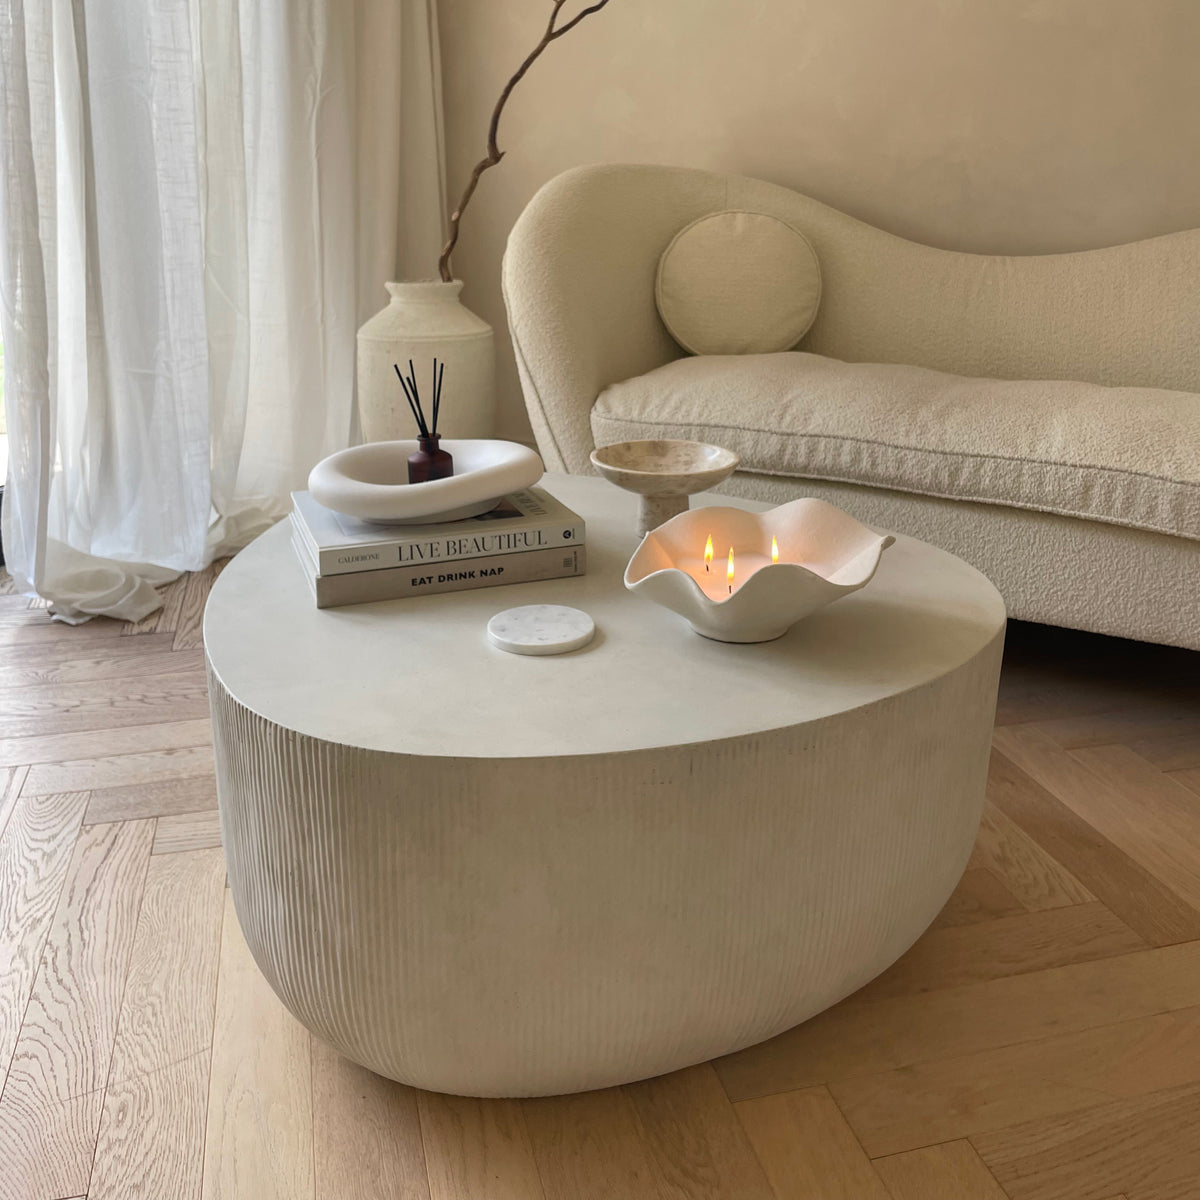 Minimal Concrete Irregular Shaped Coffee Table Large in a typical setting, candles lit